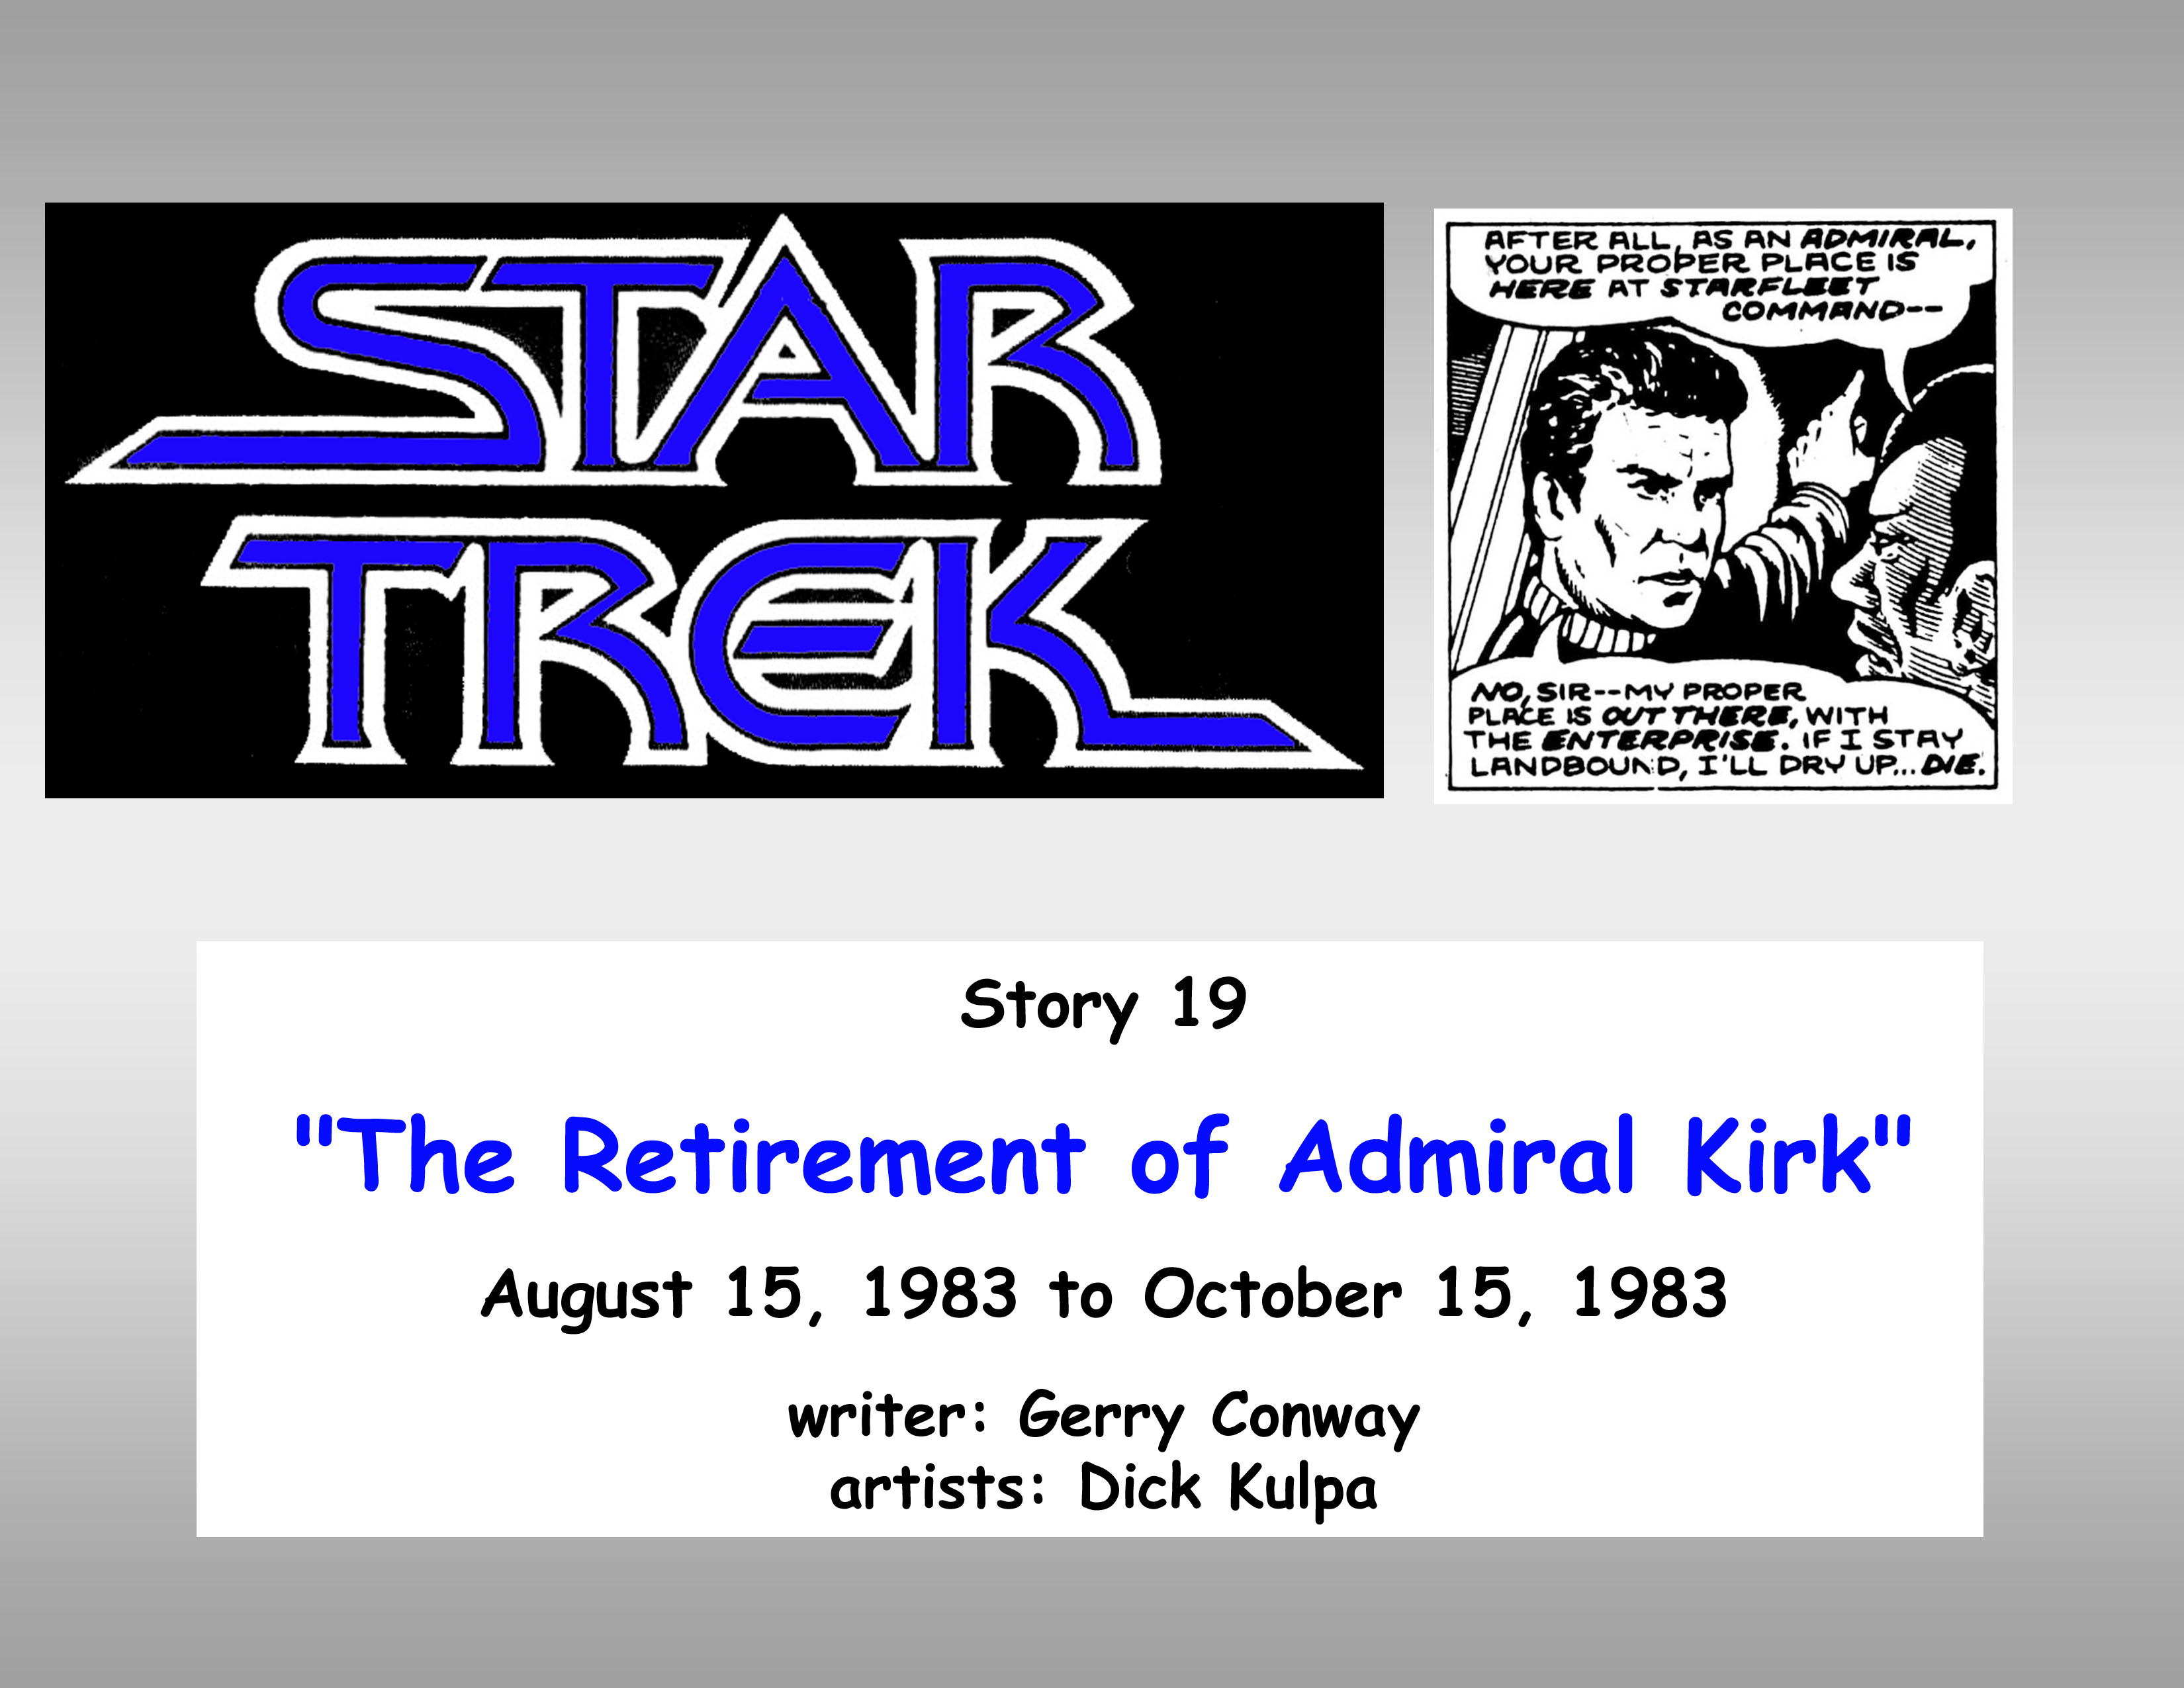 The Retirement of Admiral Kirk.